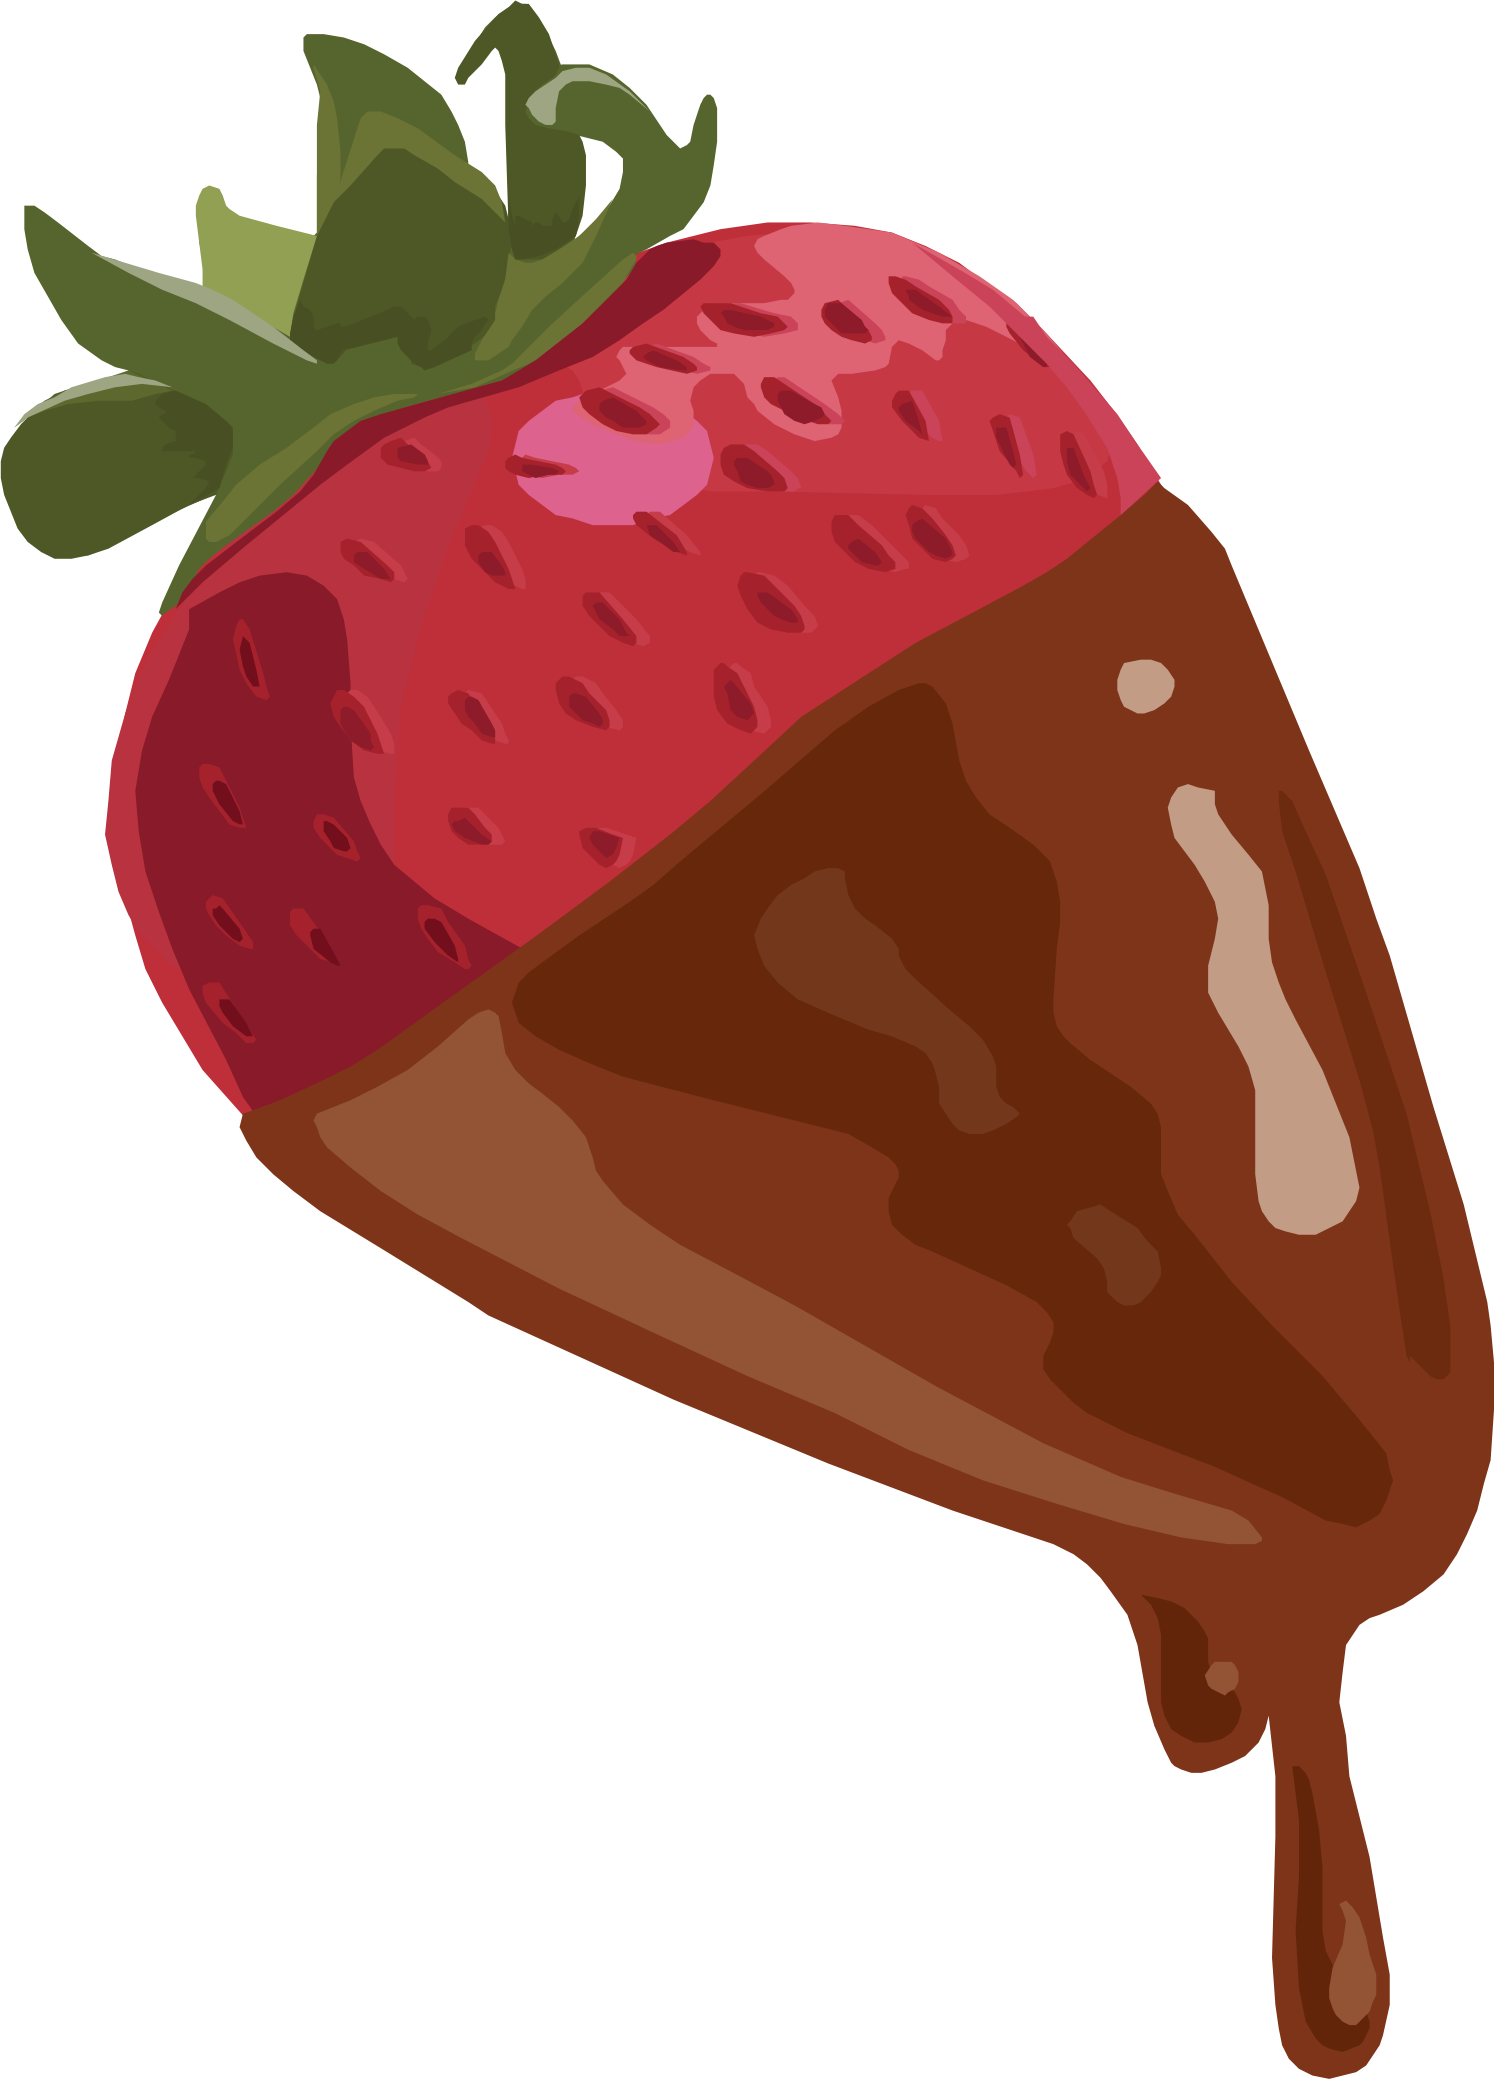 Chocolate Dipped Strawberry Illustration